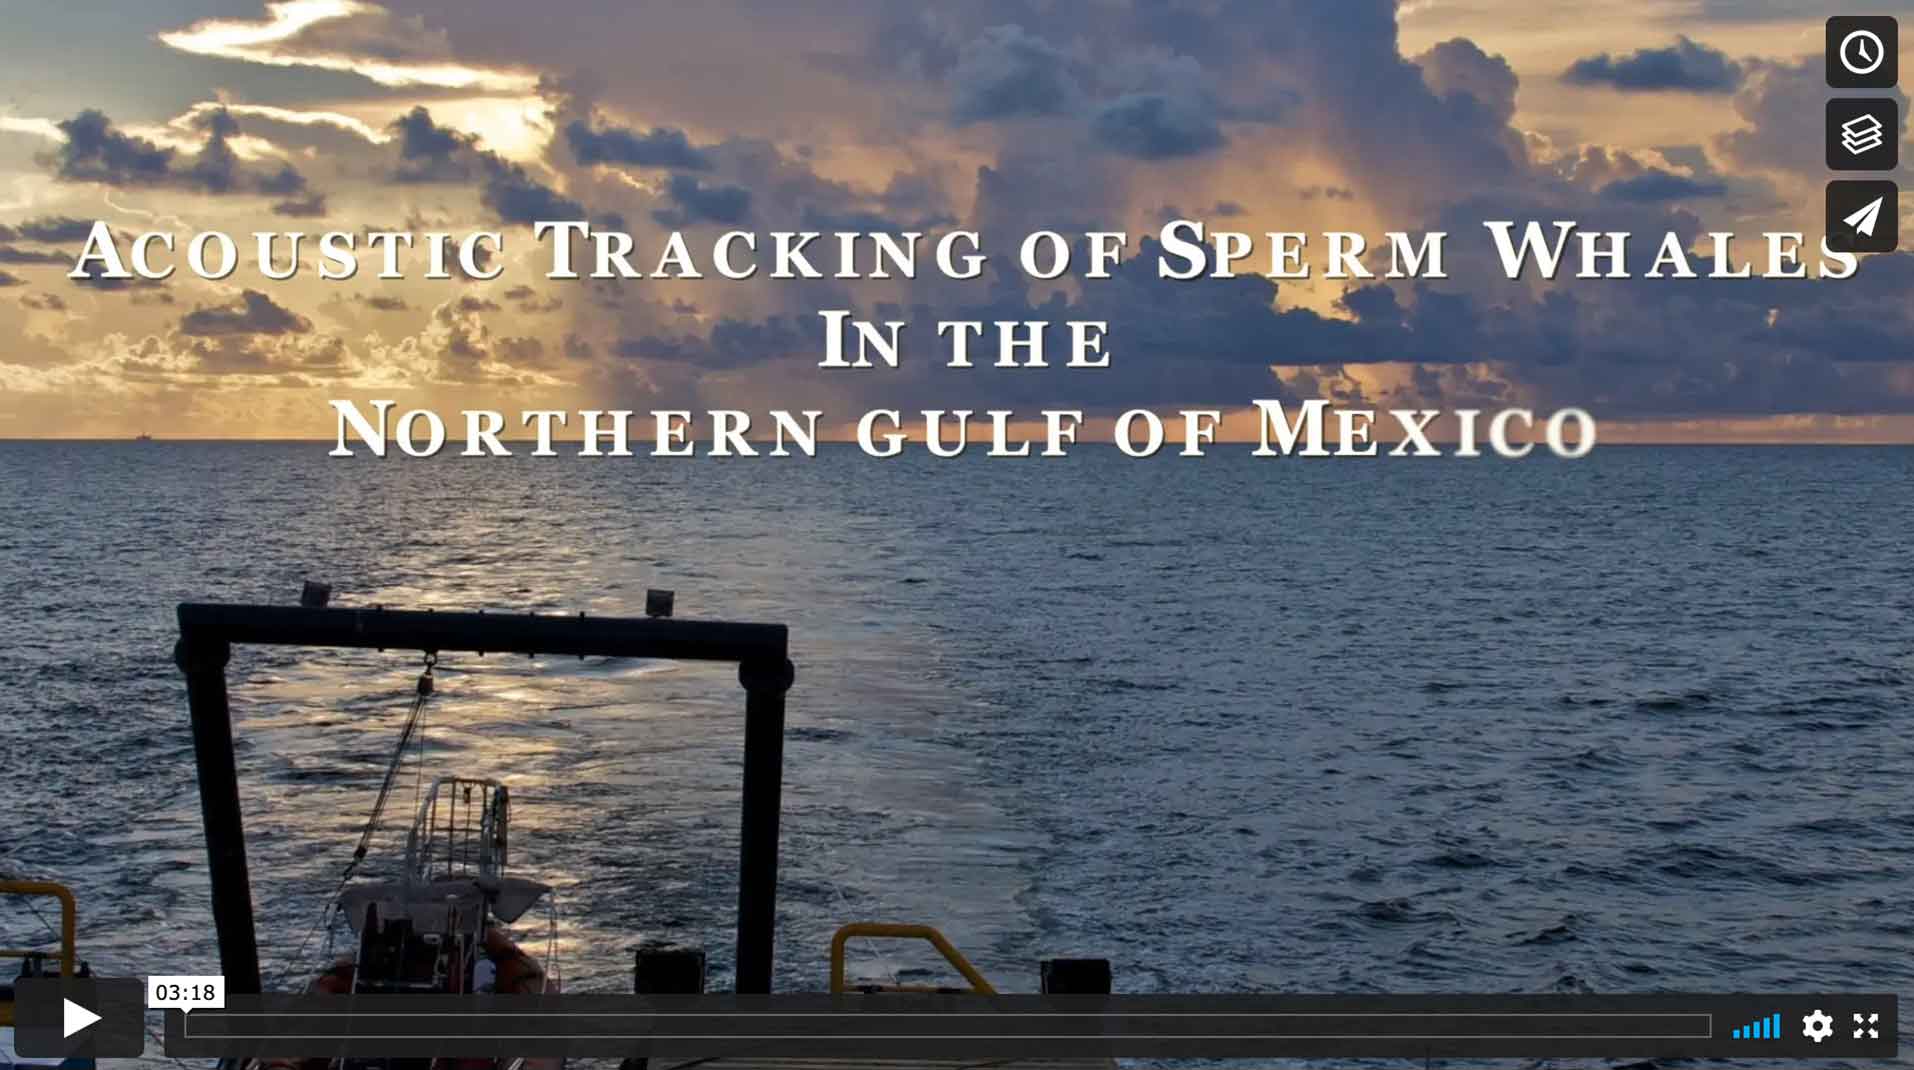 Acoustic Tracking of Sperm Whales in the Northern Gulf of Mexico